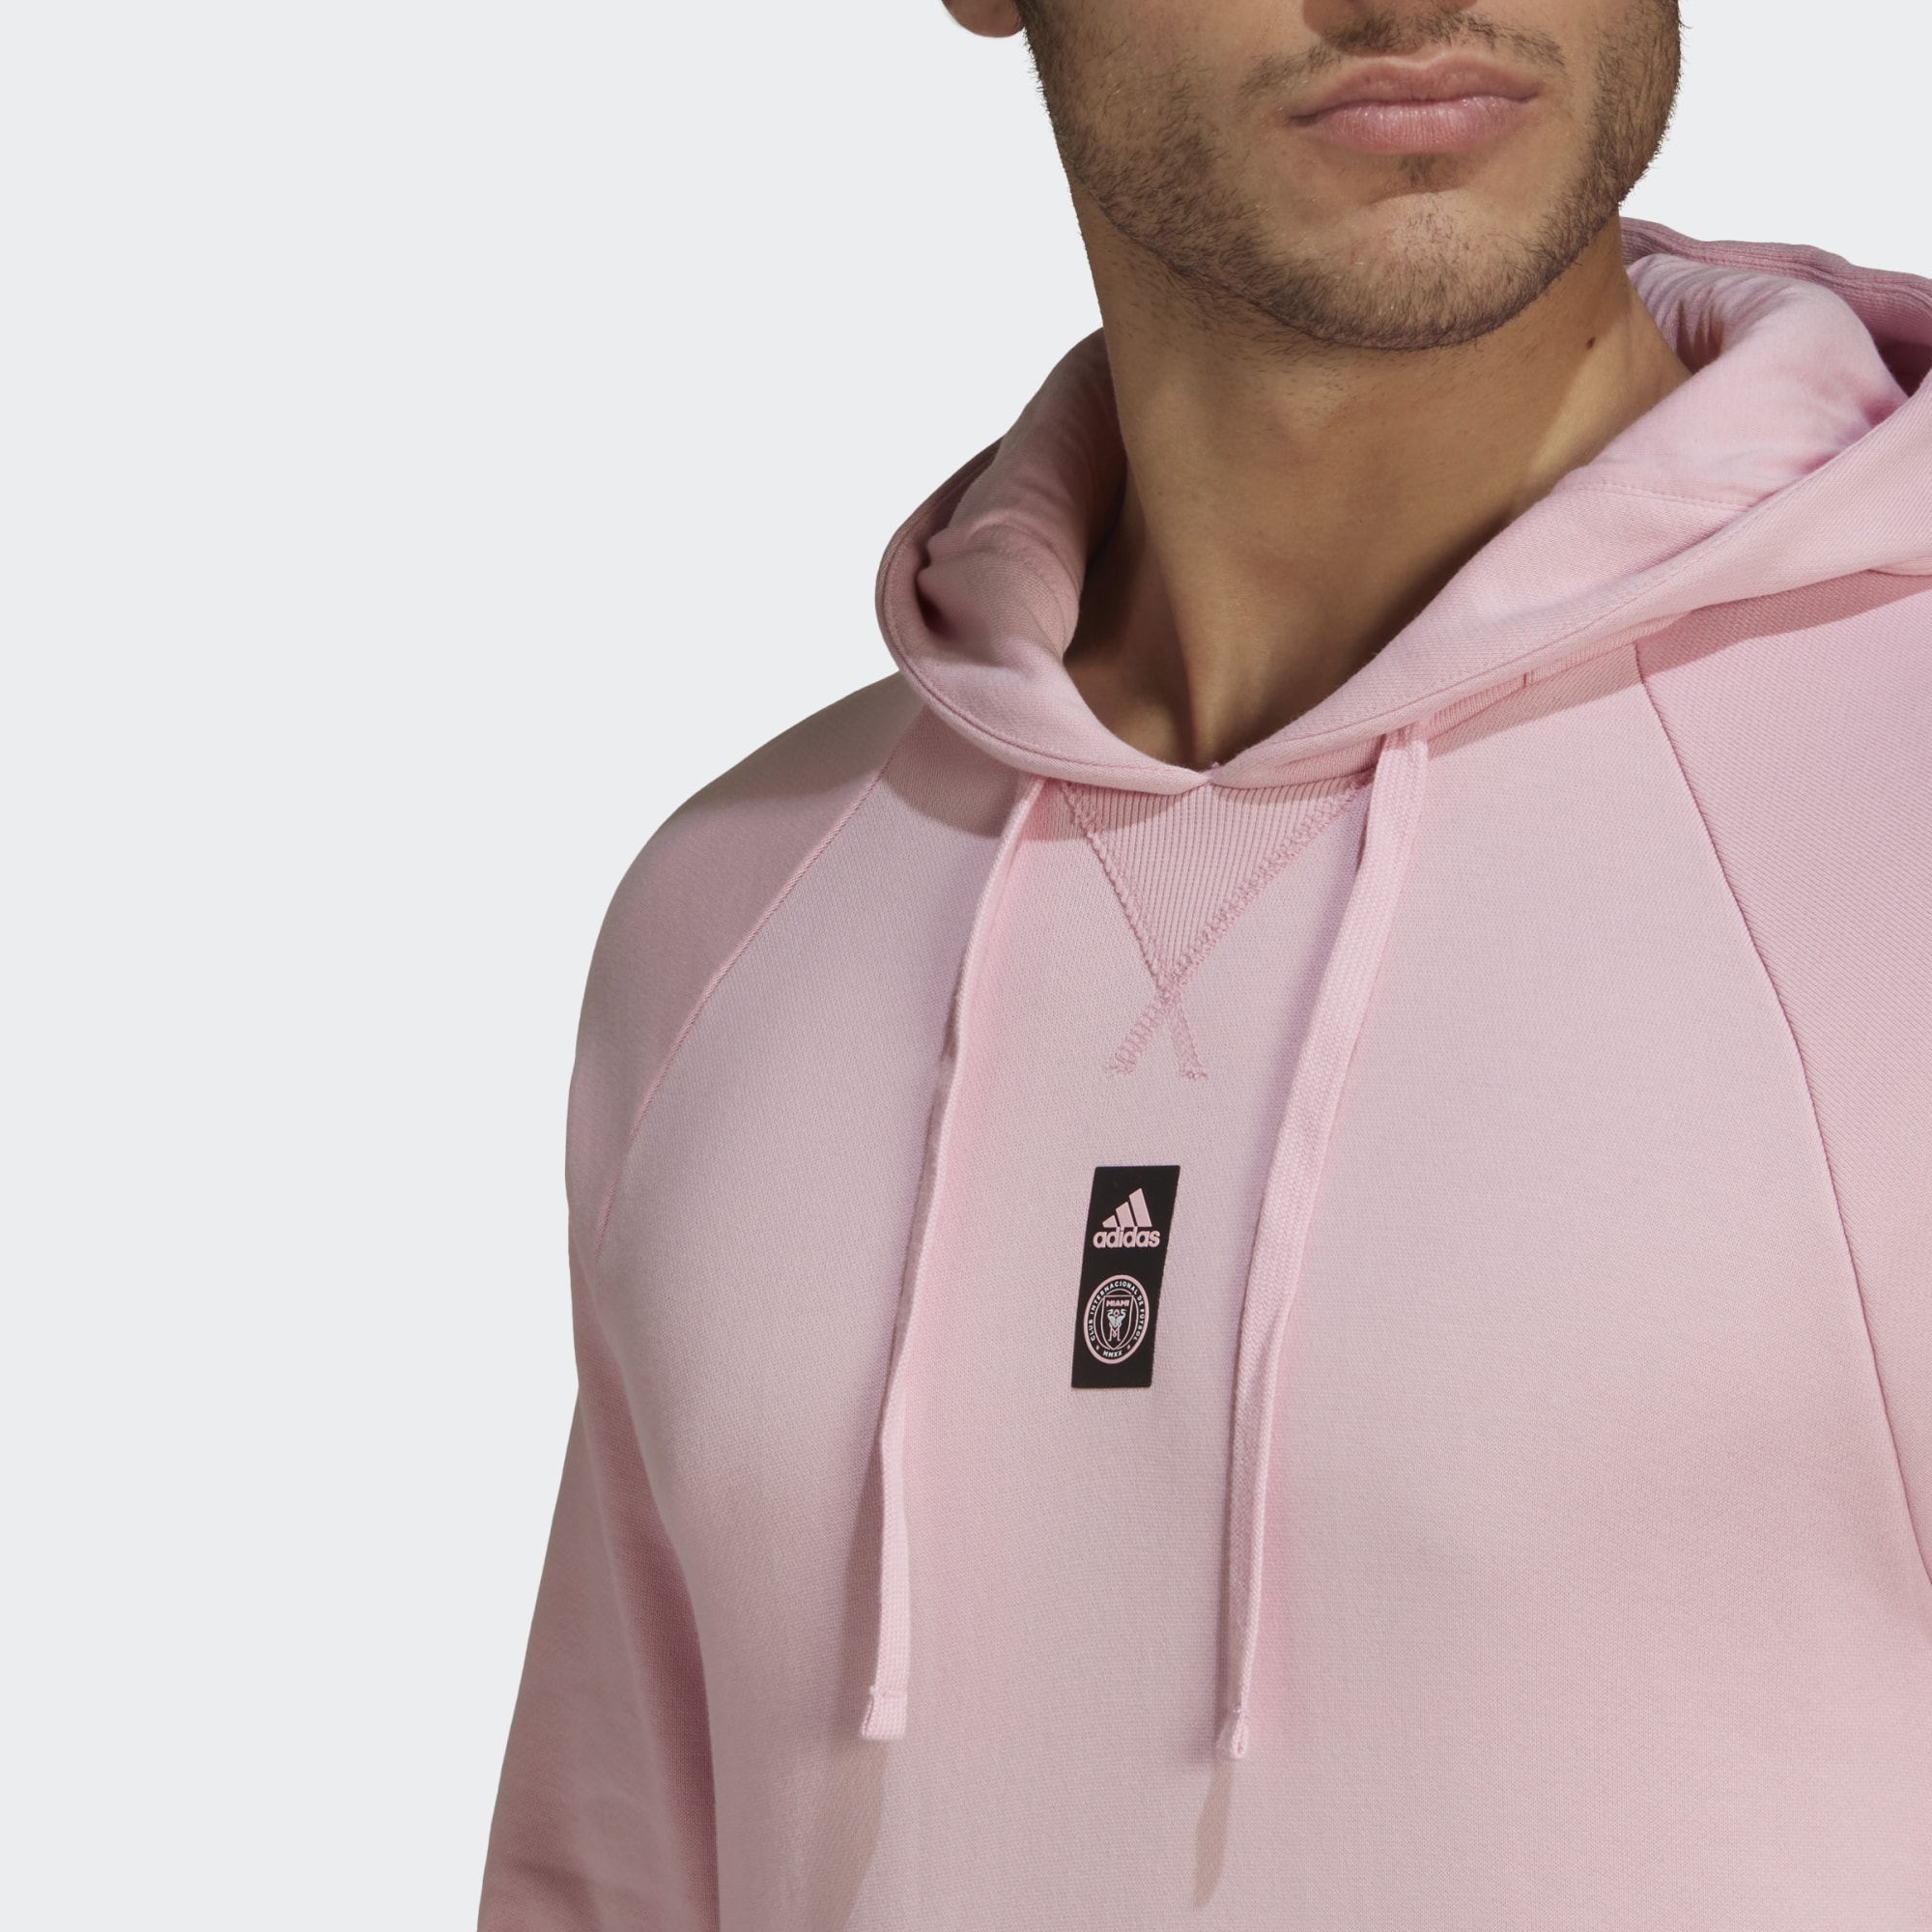 Hoodie Shirt News 2022 Culture Pink Football Kit More CF and Inter Football - True Travel Latest - Miami -